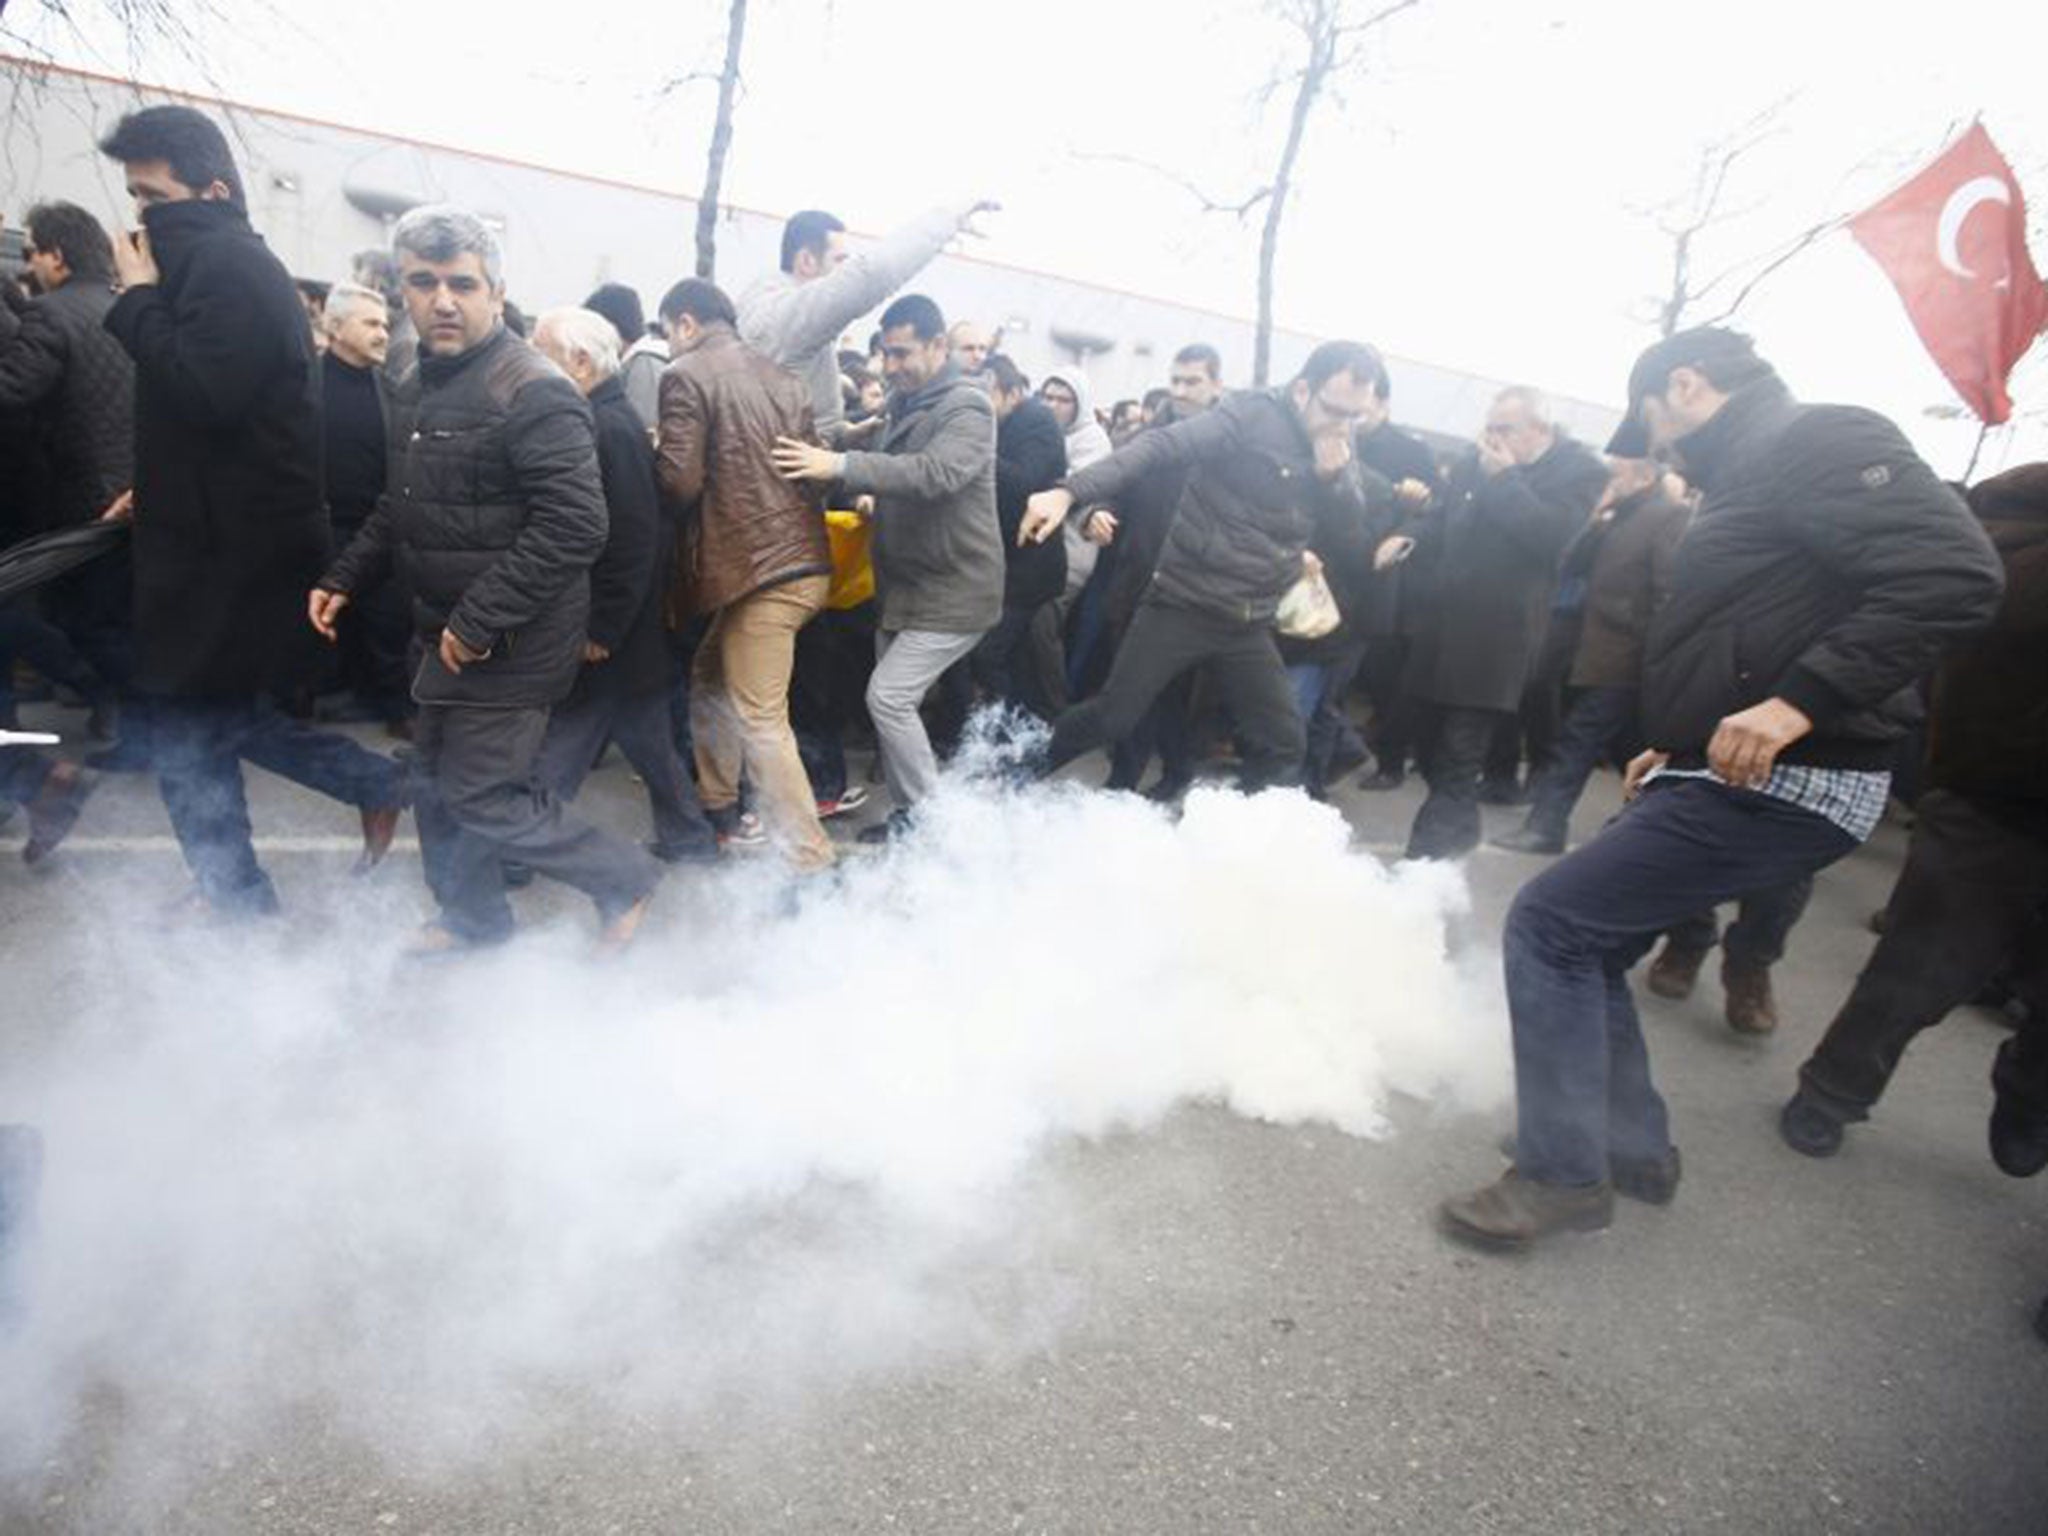 Riot police use tear gas to disperse protesting employees and supporters of Zaman newspaper at the courtyard of the newspaper's office in Istanbul, Turkey.